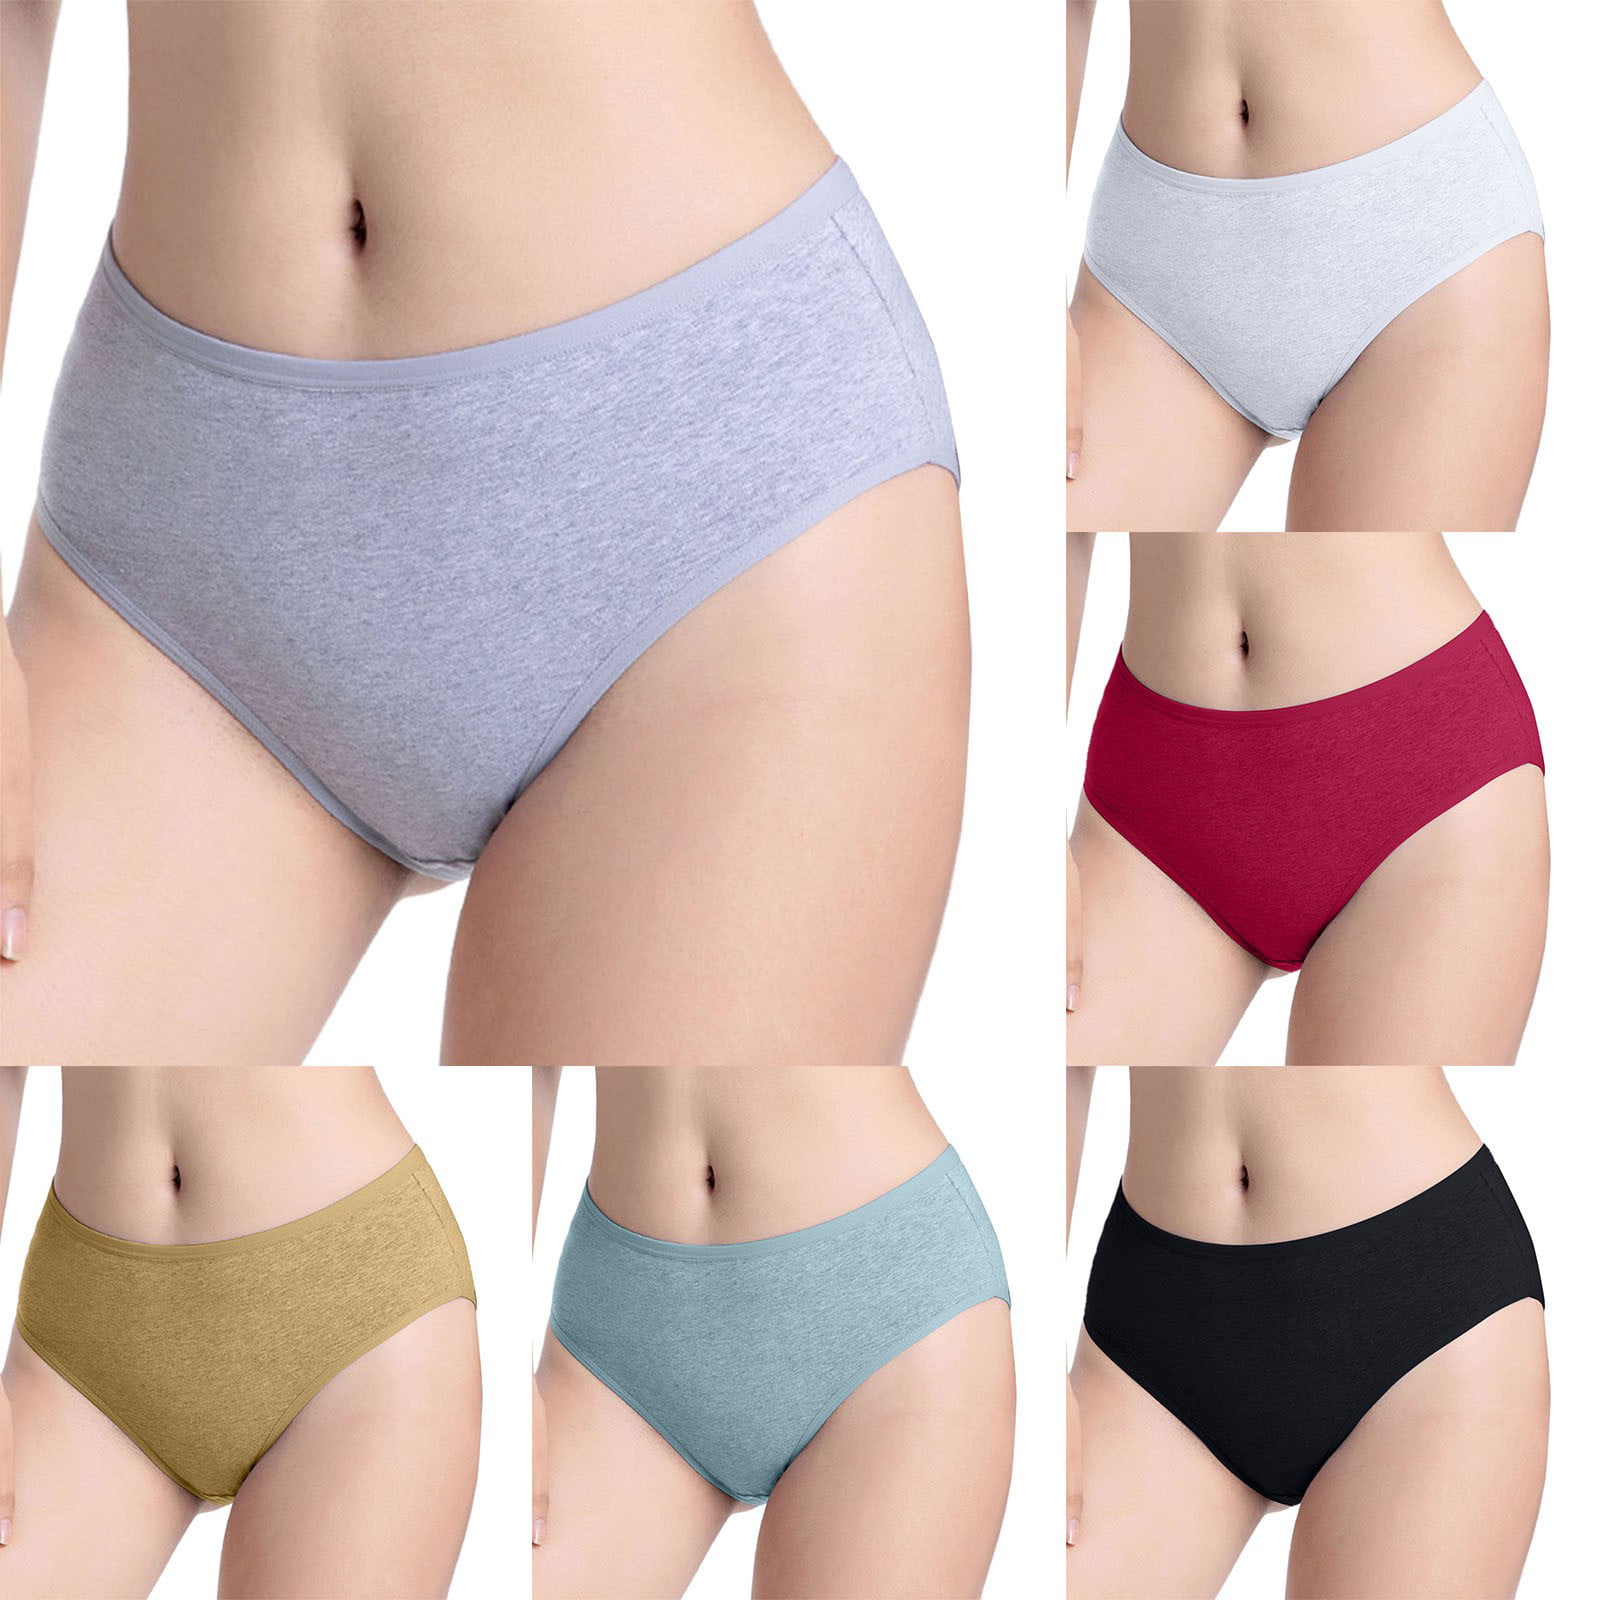 adviicd Panties for Women Pack Tummy Control Women's Underwear No Panty  Line Promise Tactel Hi Cut D X-Small